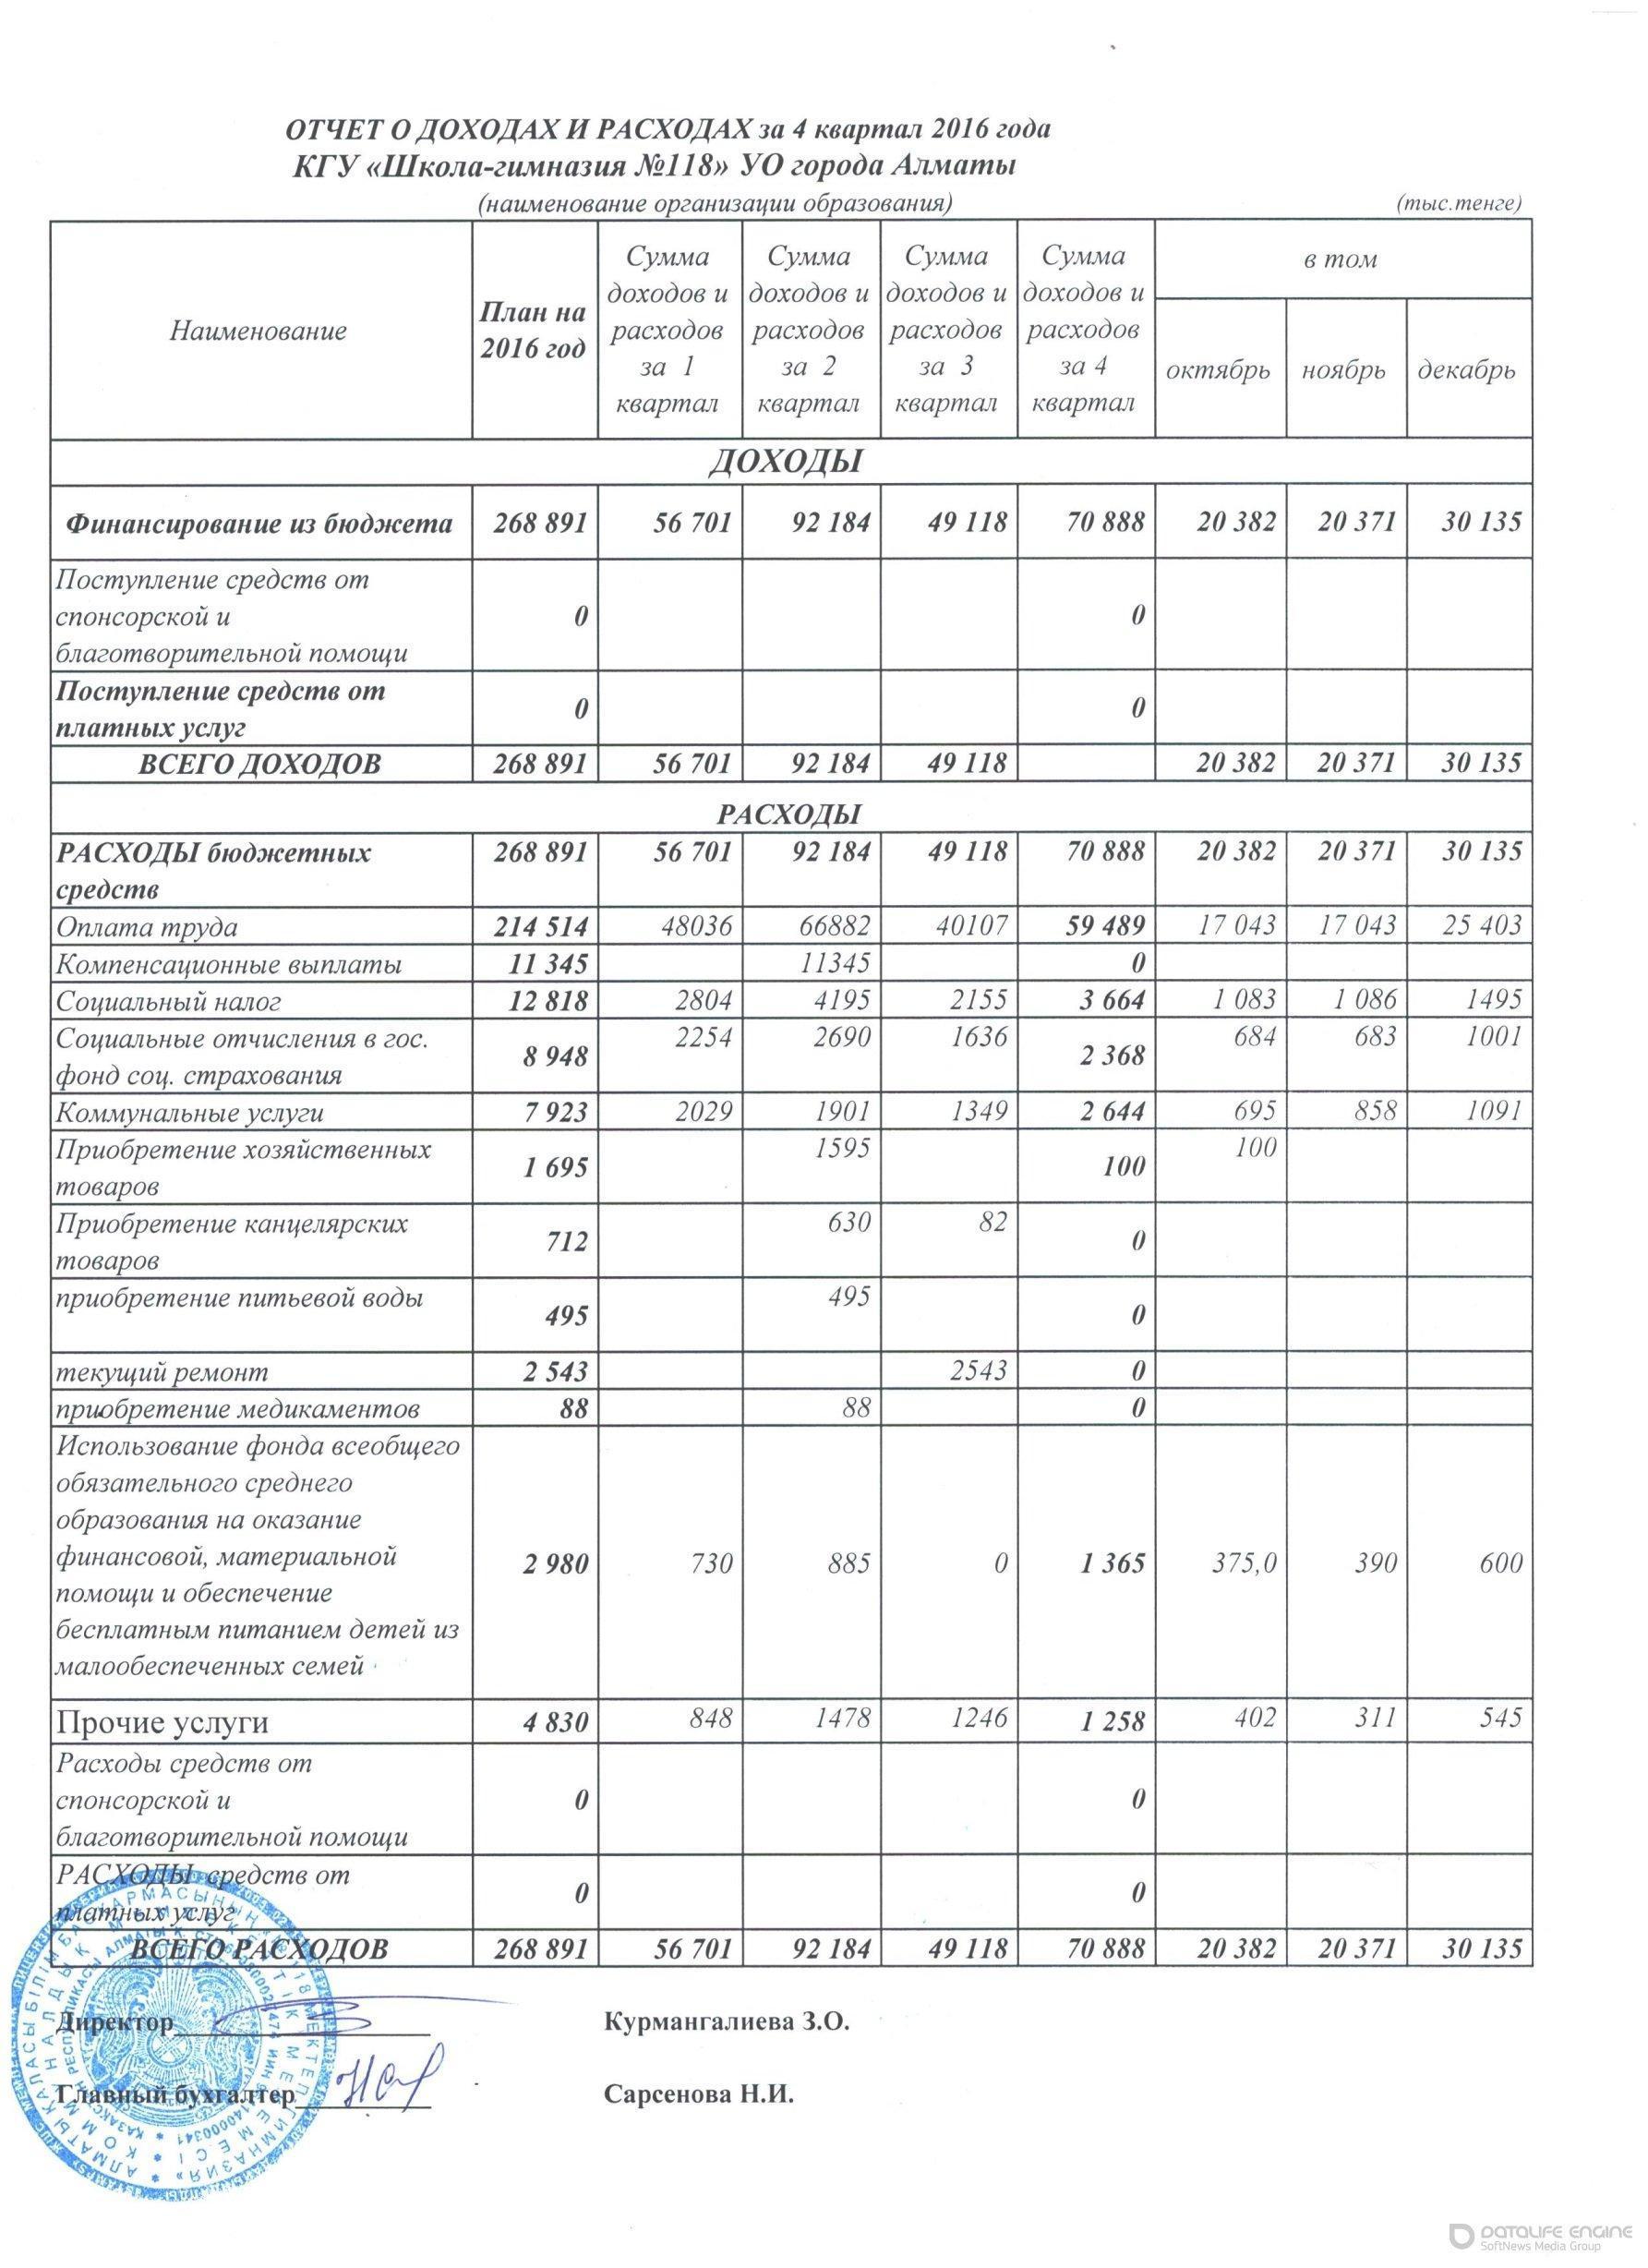 Statement of income and expenses за IV квартал 2016 года